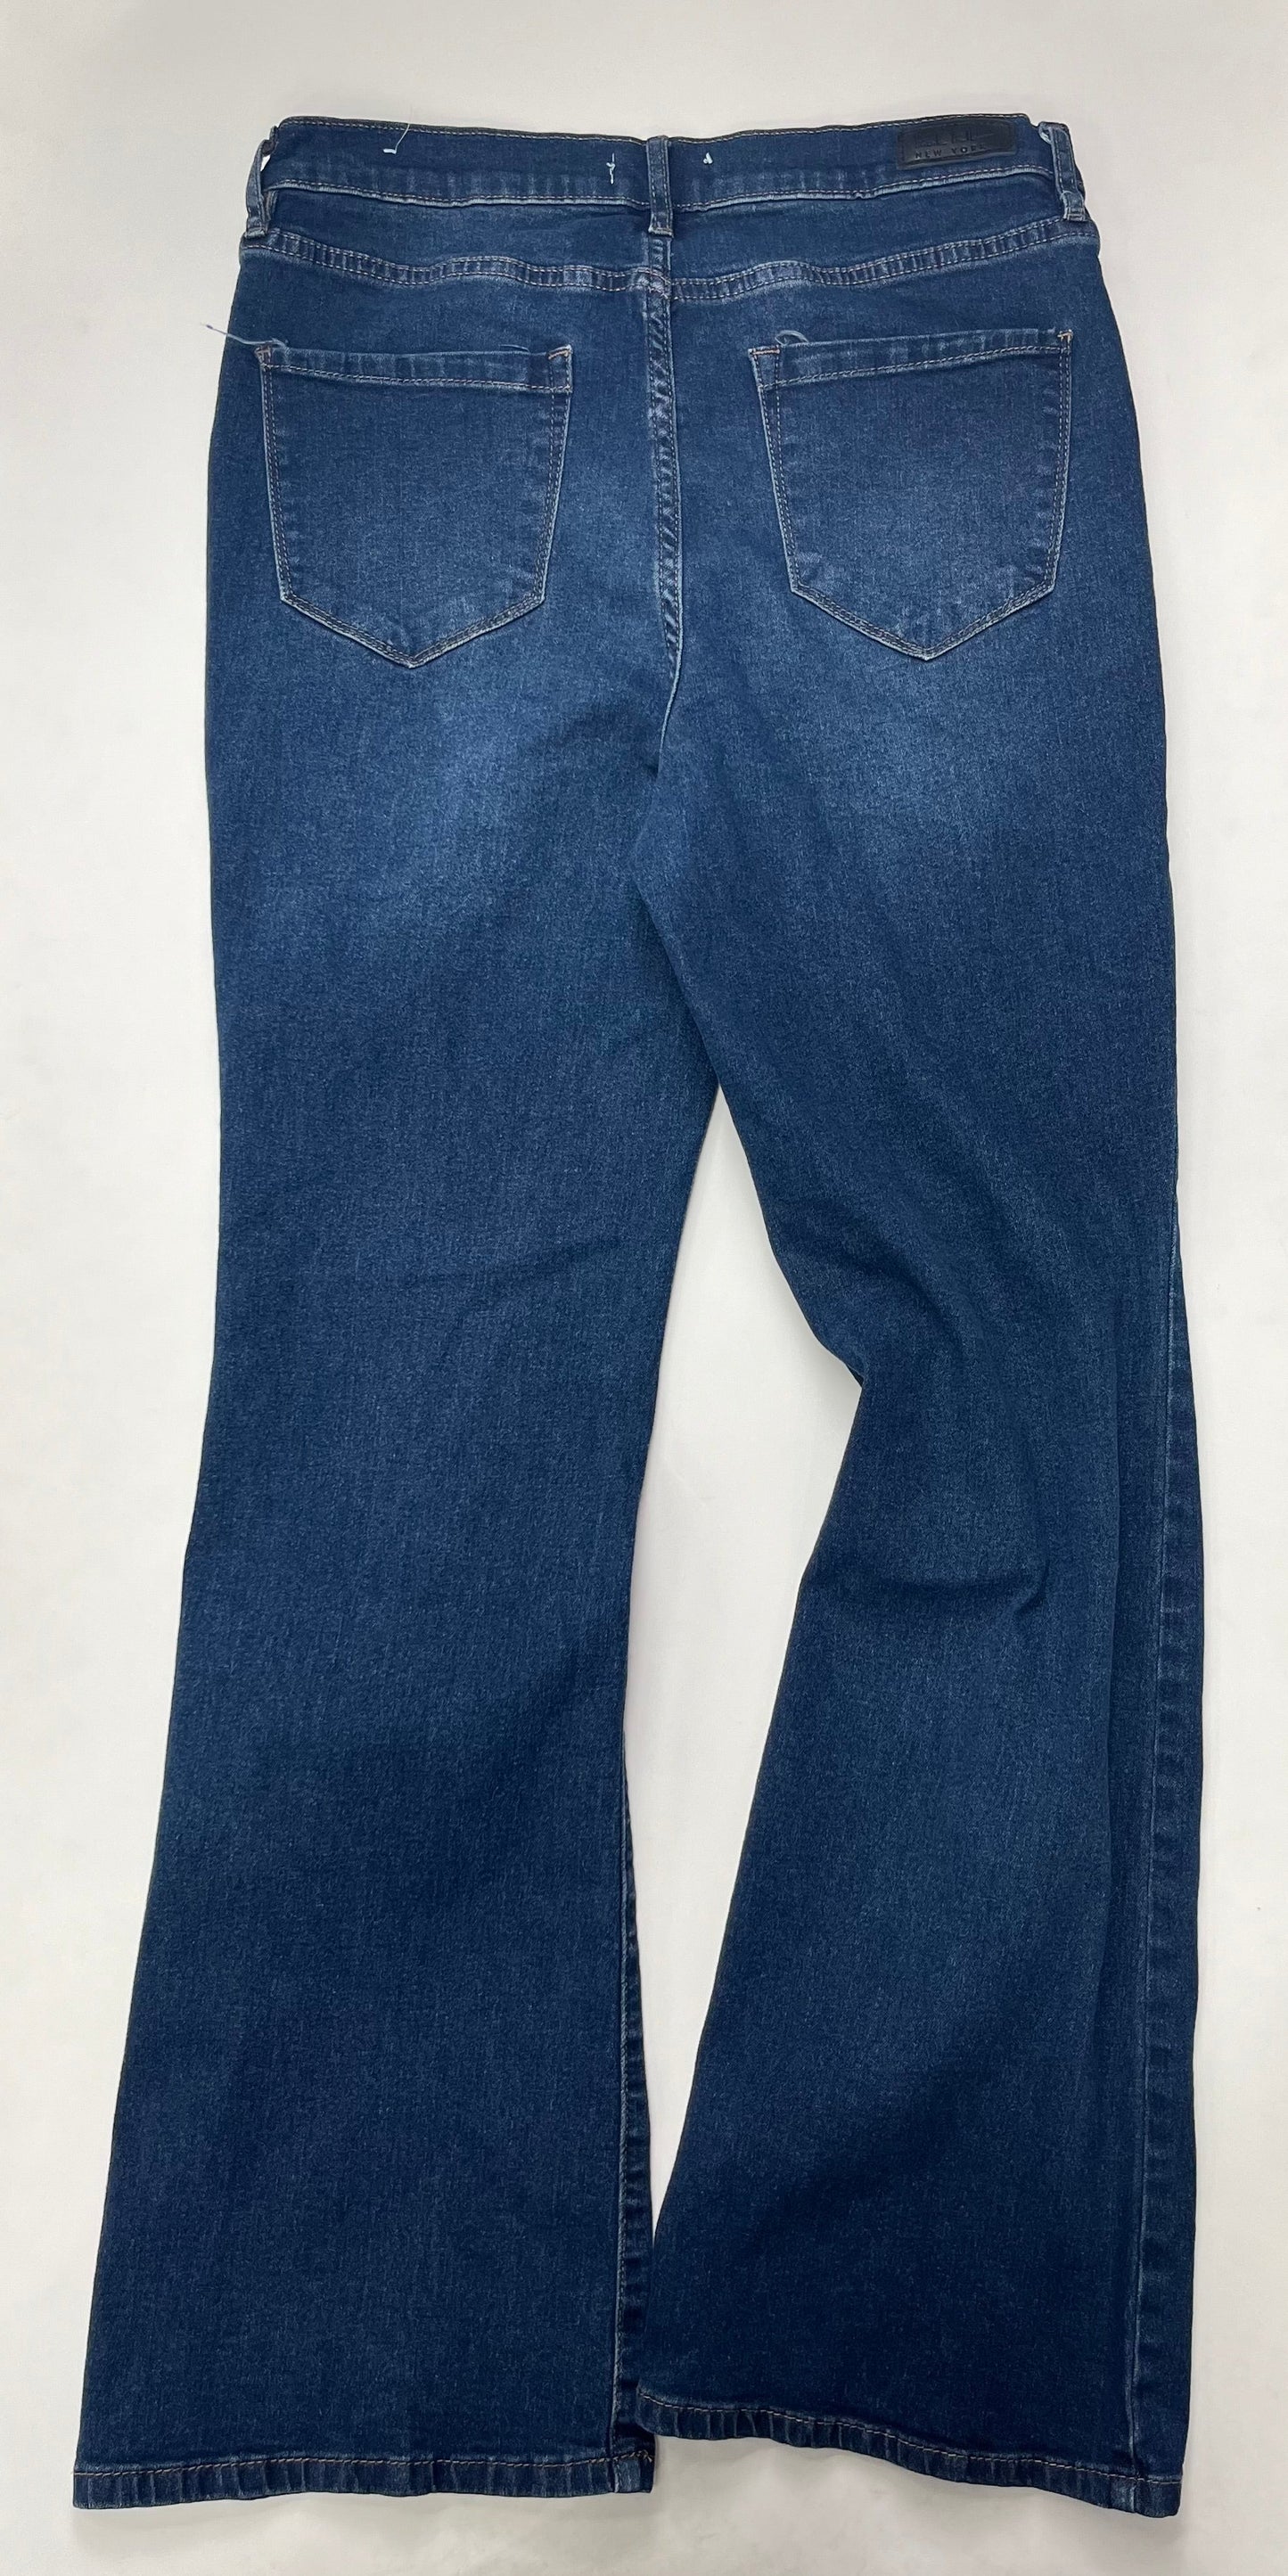 Denim Jeans Flared Nicole By Nicole Miller, Size 8